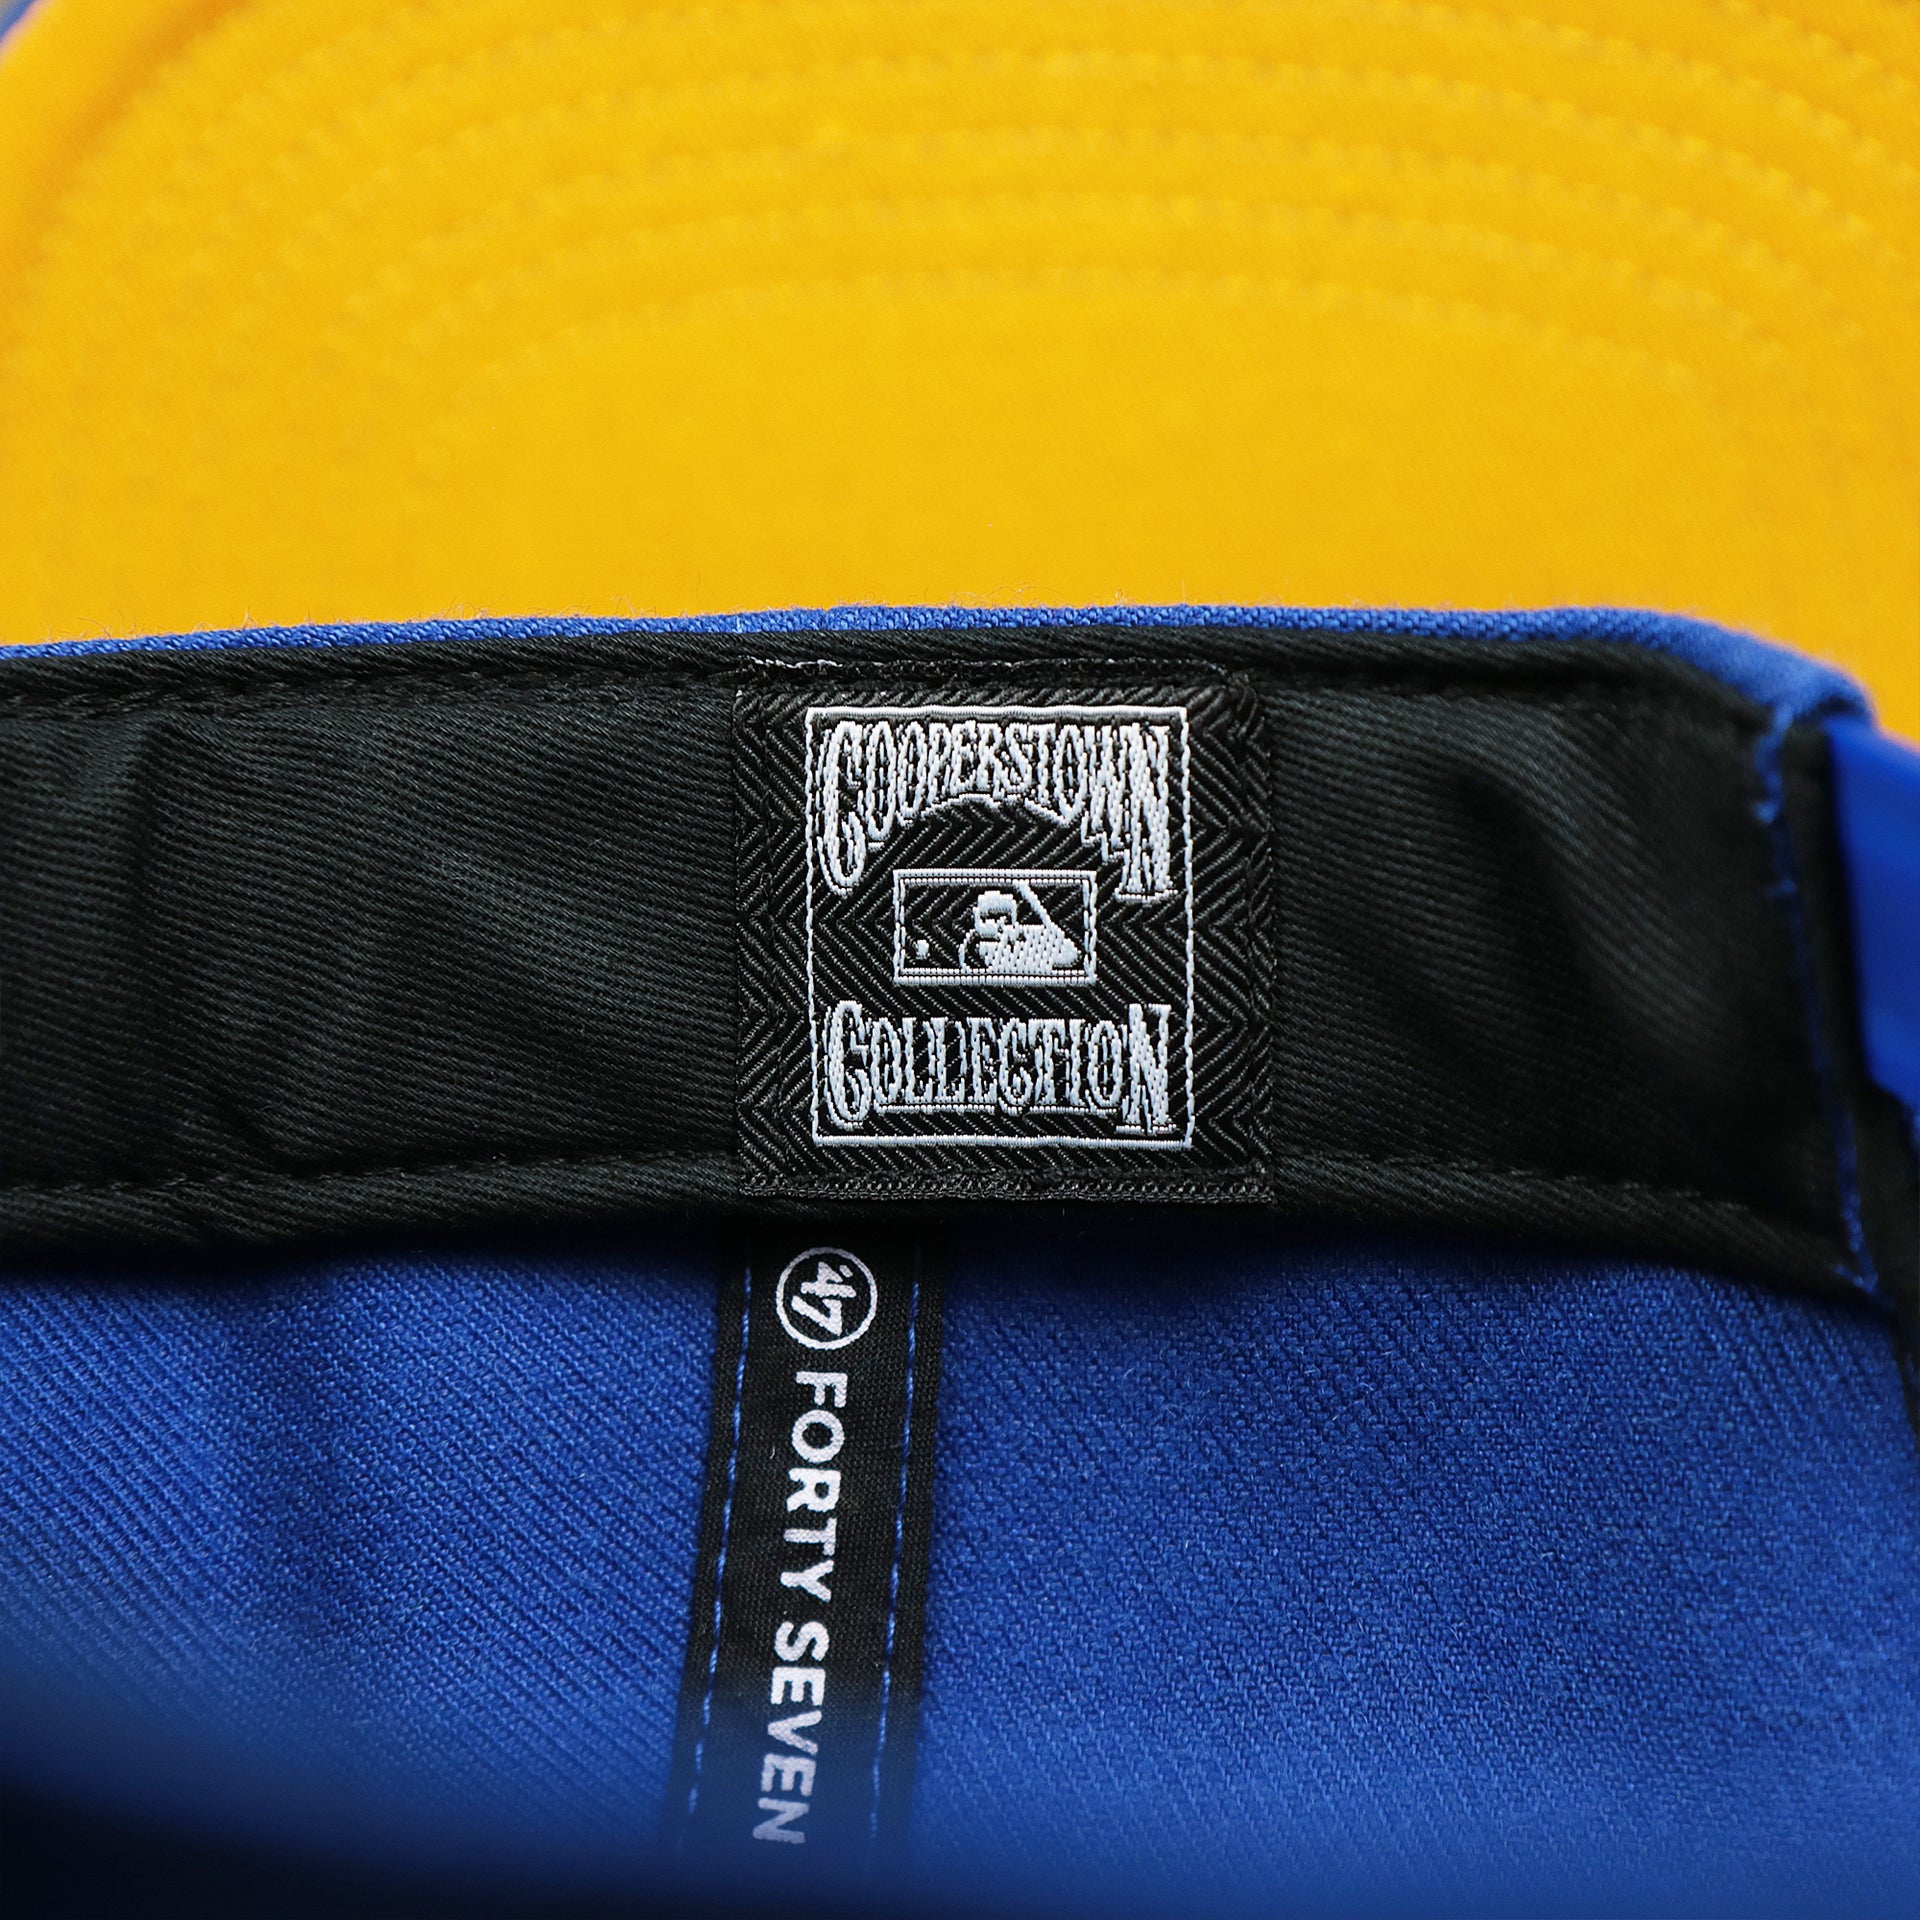 The Cooperstown Collection on the Cooperstown Philadelphia Athletics Wordmark Retro Athletics Side Patch Snapback | Royal Blue Snapback